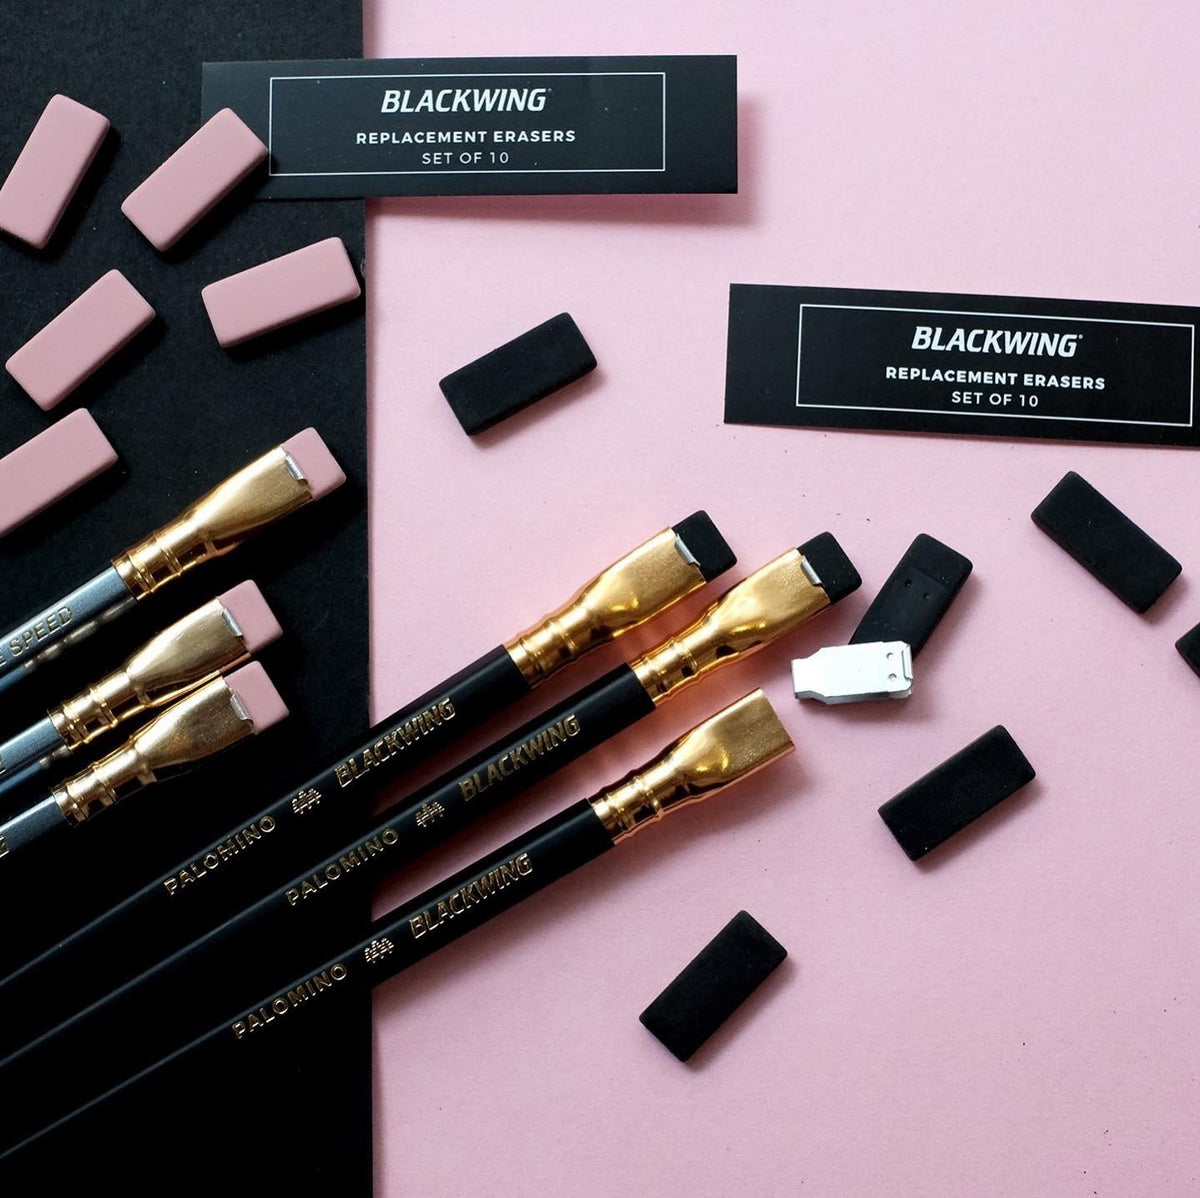 A collection of Palomino Blackwing pencils with Replacement Eraser 10pk - White ⋄ Black ⋄ Pink design erasers on a pink surface.